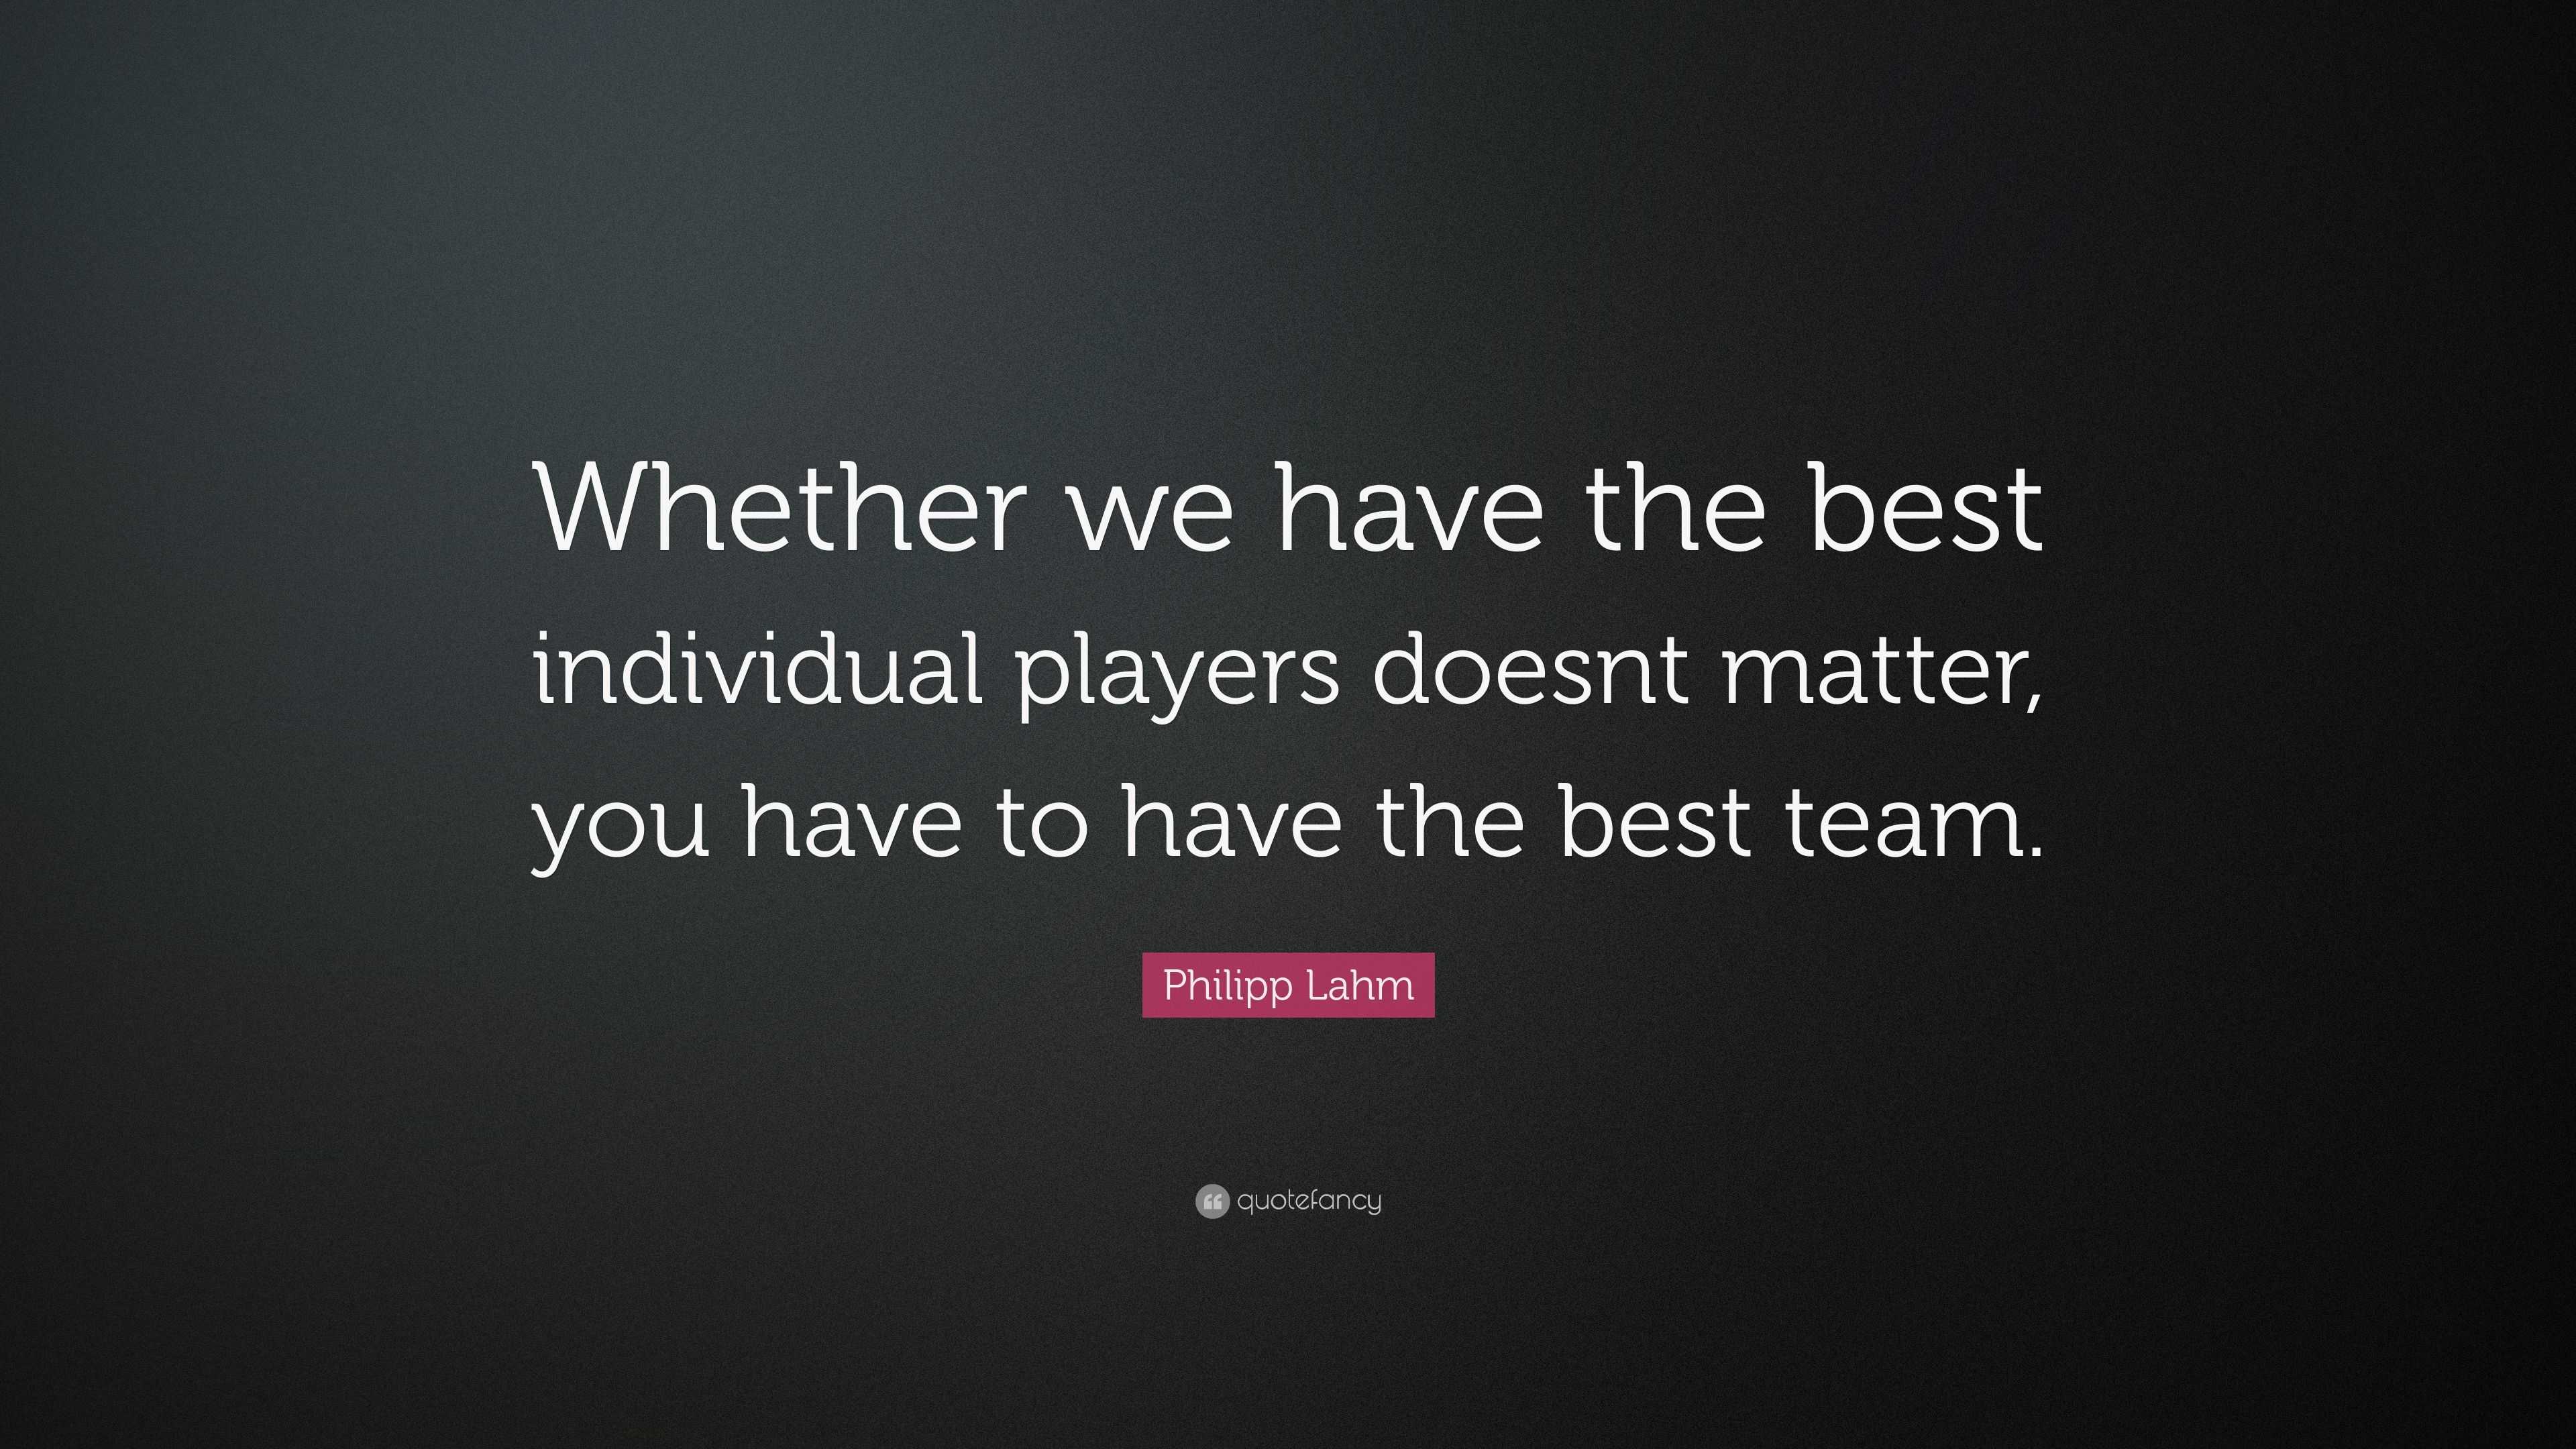 Philipp Lahm Quote: “Whether we have the best individual players doesnt ...